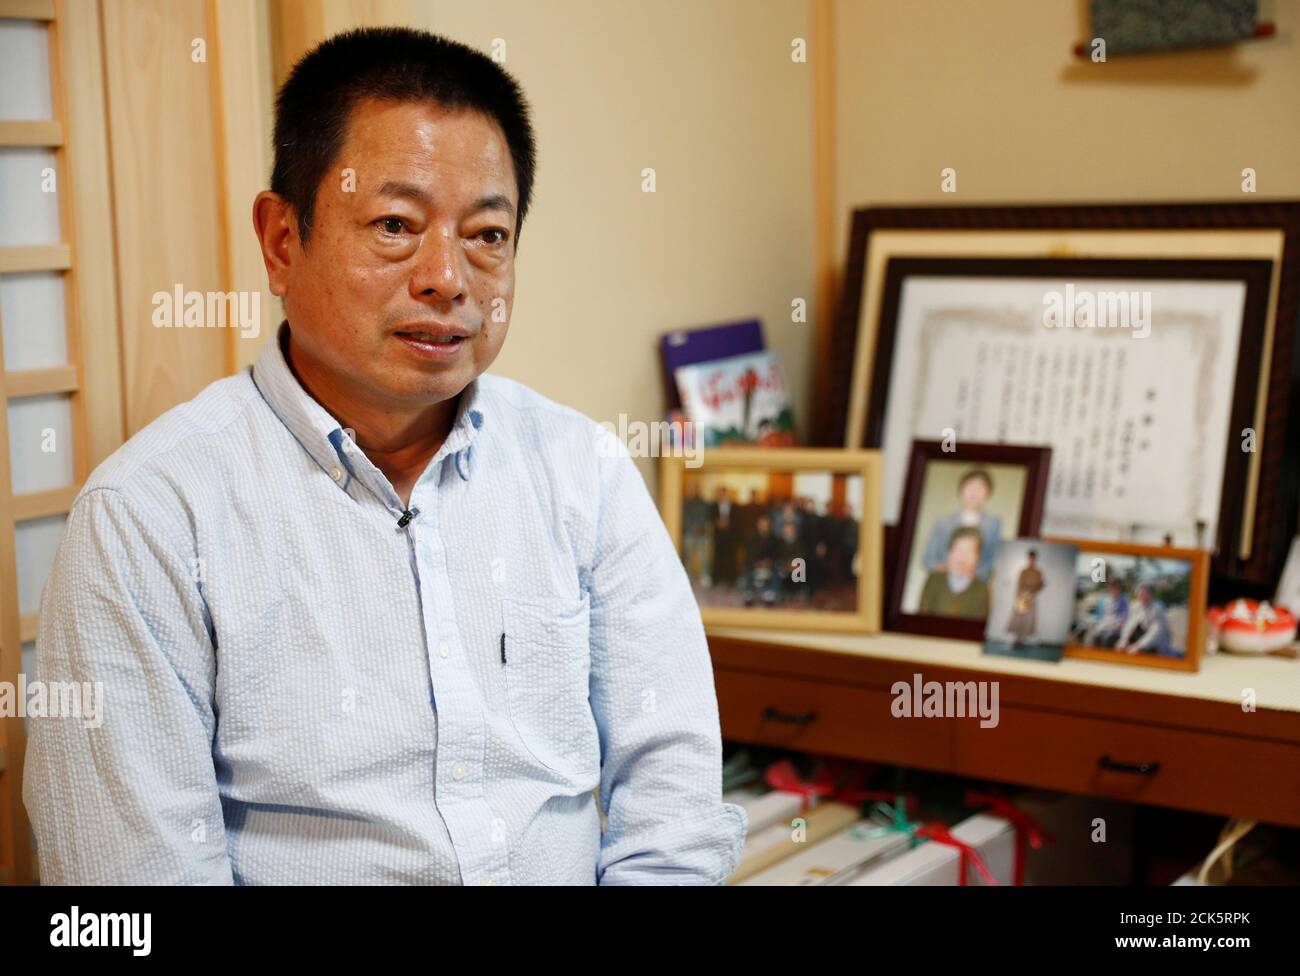 Masaaki Kimura, 63, speaks to Reuters about the loss of his wife Takoko, his mother, mother-in-law and his uncle to the 2011 tsunami, at his home in Unosumai, Japan September 24, 2019. Masaaki plans to watch the Rugby World Cup matches at Kamaishi stadium which was built on the former site of two schools that were destroyed by the 2011 tsunami. Masaaki lost his wife who was a schoolteacher in one of the schools that day.  REUTERS/Edgar Su Stock Photo